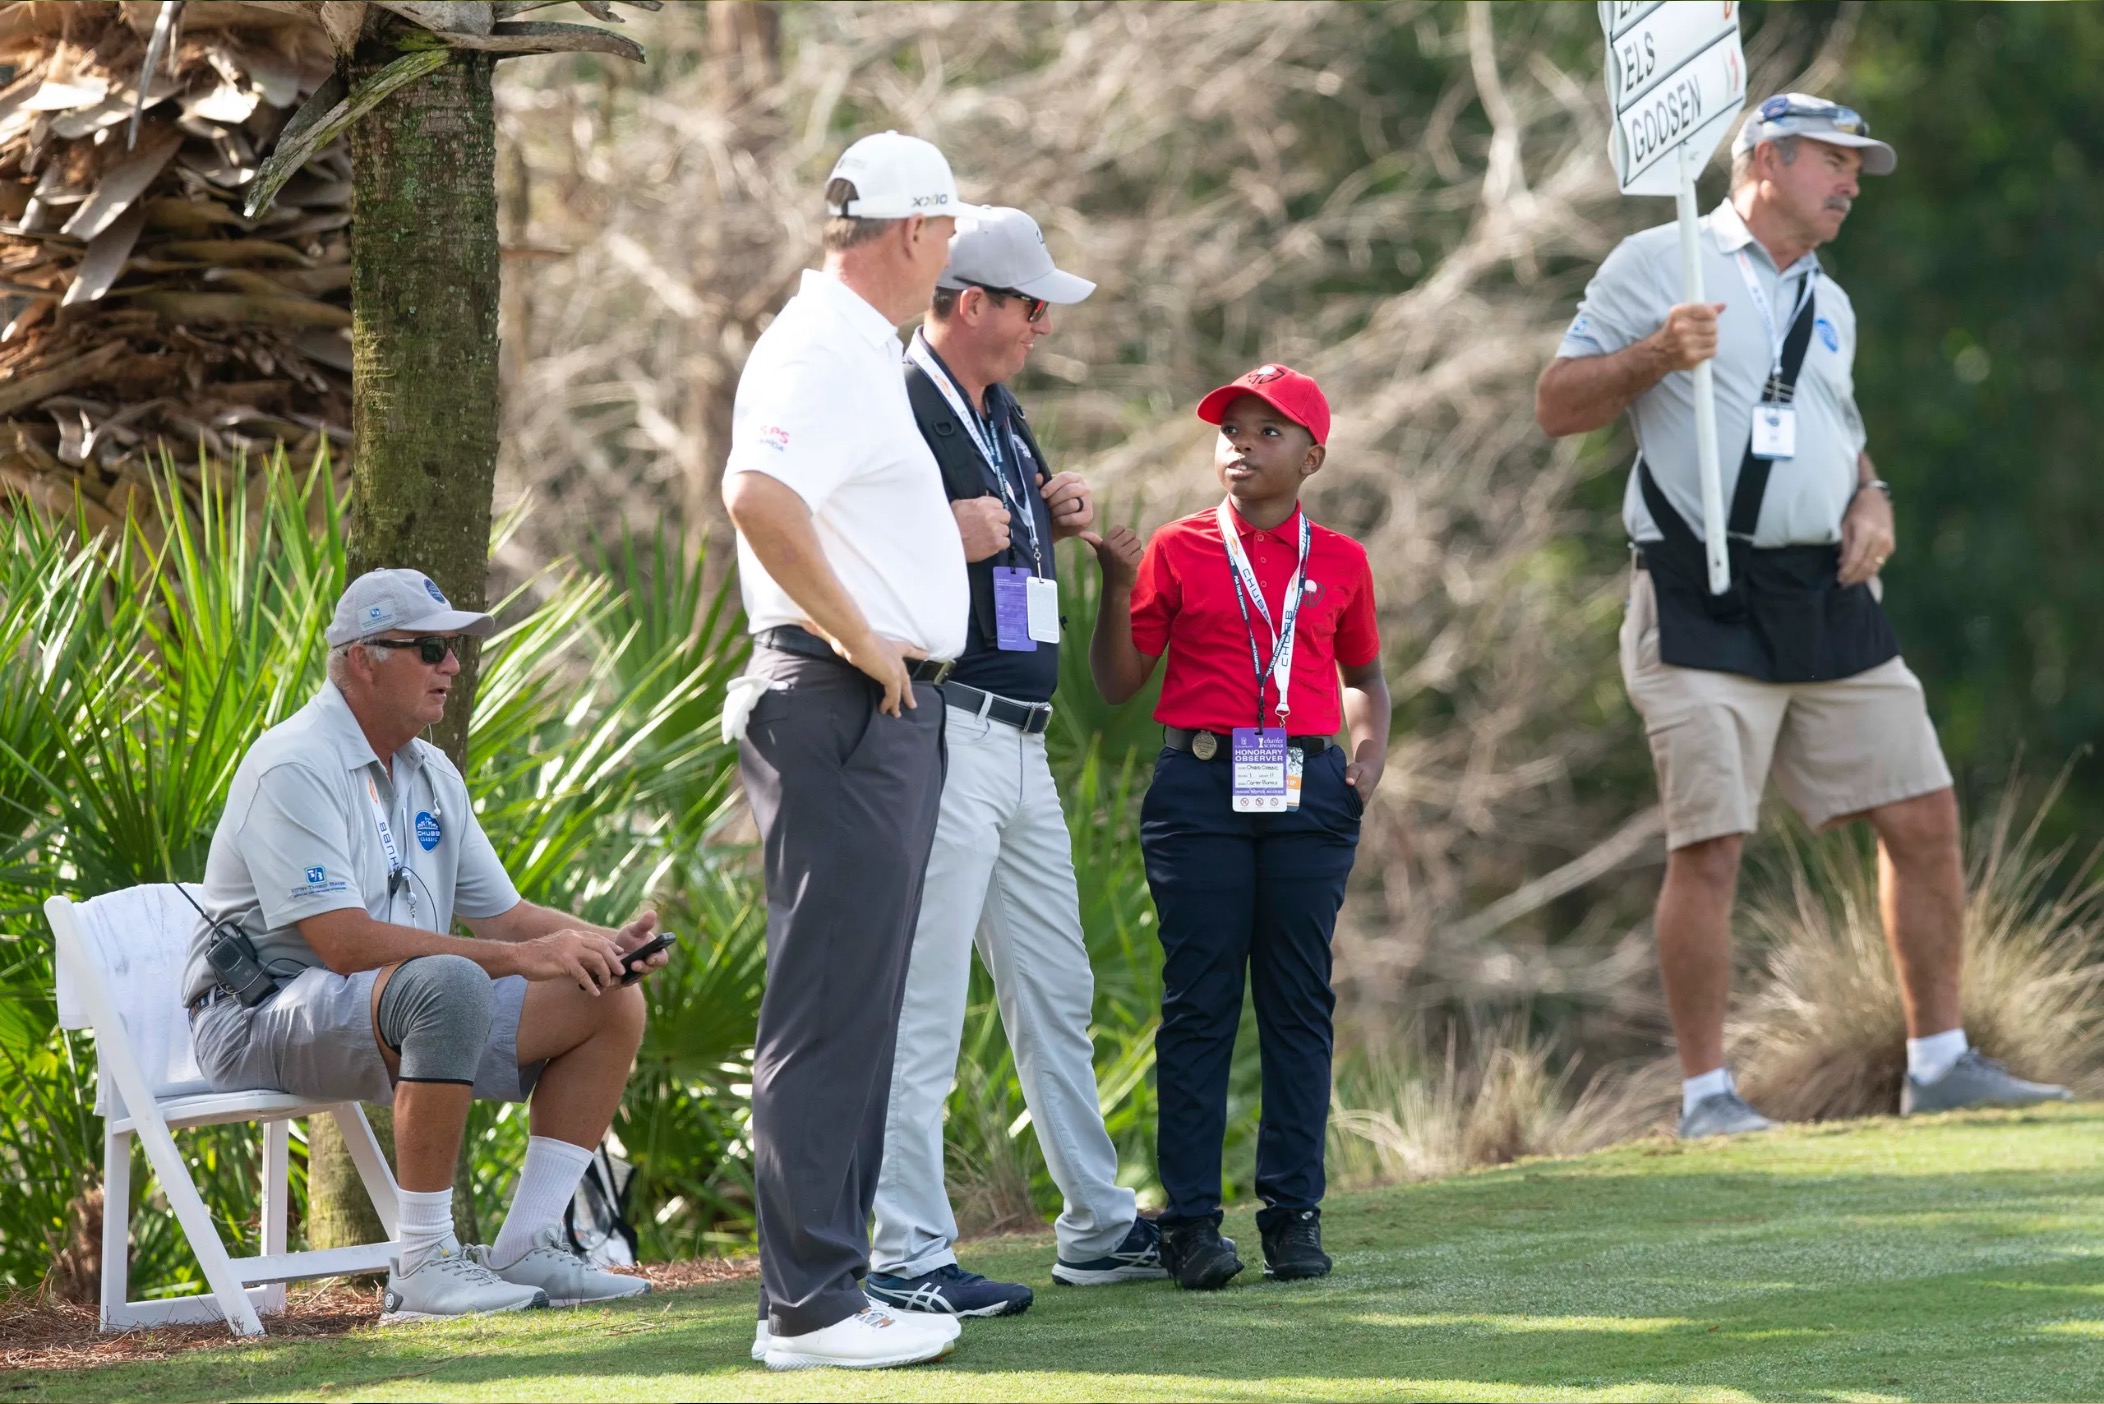 Bonas talks with Els on the first hole during the first round of the Chubb Classic, Friday, Feb. 18, 2022, at Tiburón Golf Club at The Ritz-Carlton Golf Resort in Naples, Fla. — LANDON BOST/NAPLES DAILY NEWS/USA TODAY NETWORK-FLORIDA